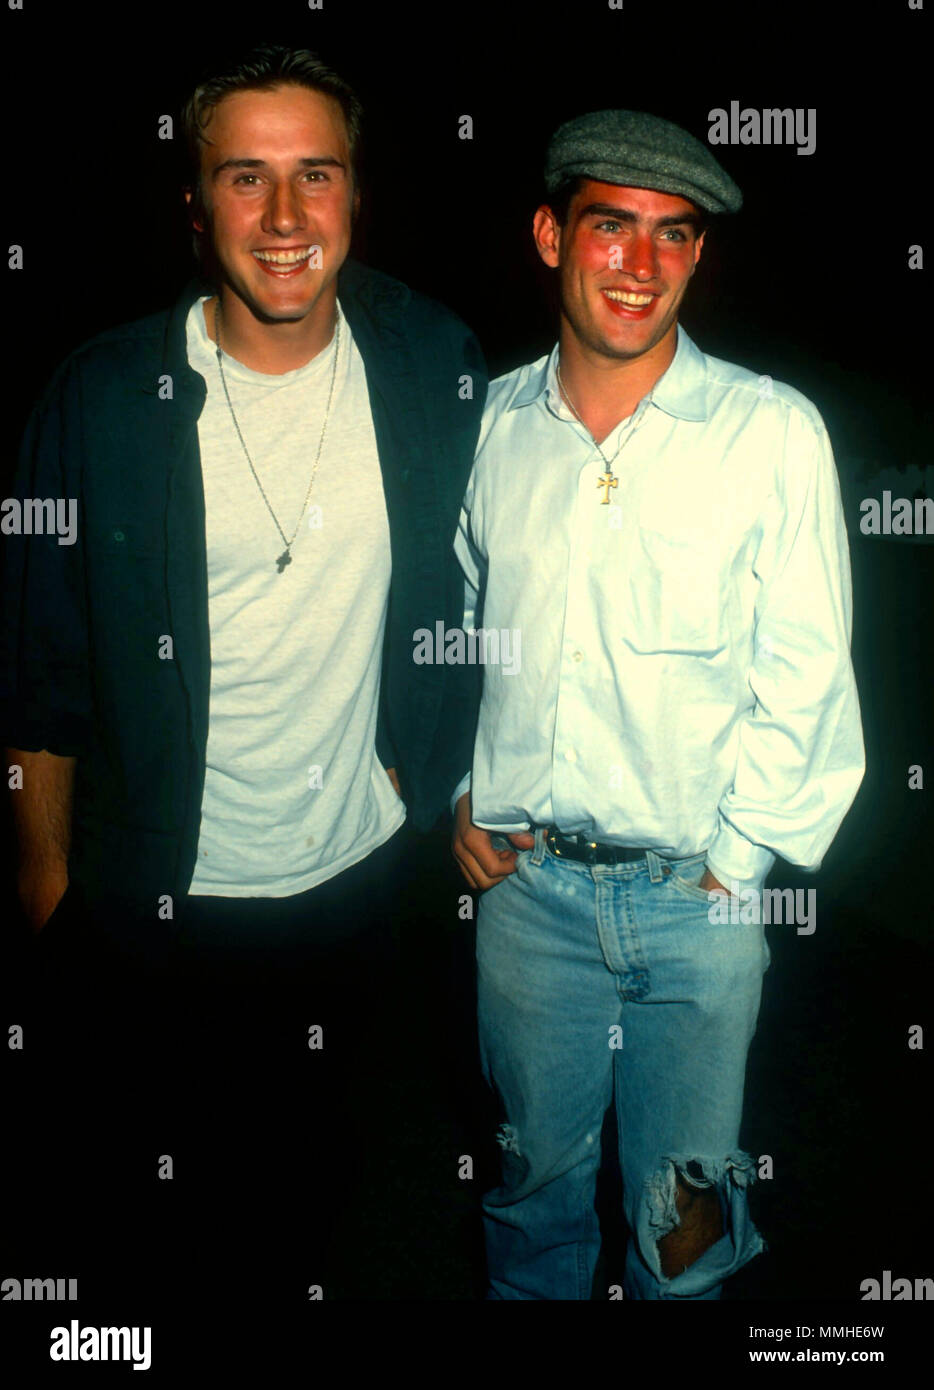 LOS ANGELES, CA - MAY 26: (L-R) Actors David Arquette and Rodney Harvey attend Bernie Taupin's 40th Birthday Party at The Roxbury on May 26, 1990 in Los Angeles, California. Photo by Barry King/Alamy Stock Photo Stock Photo